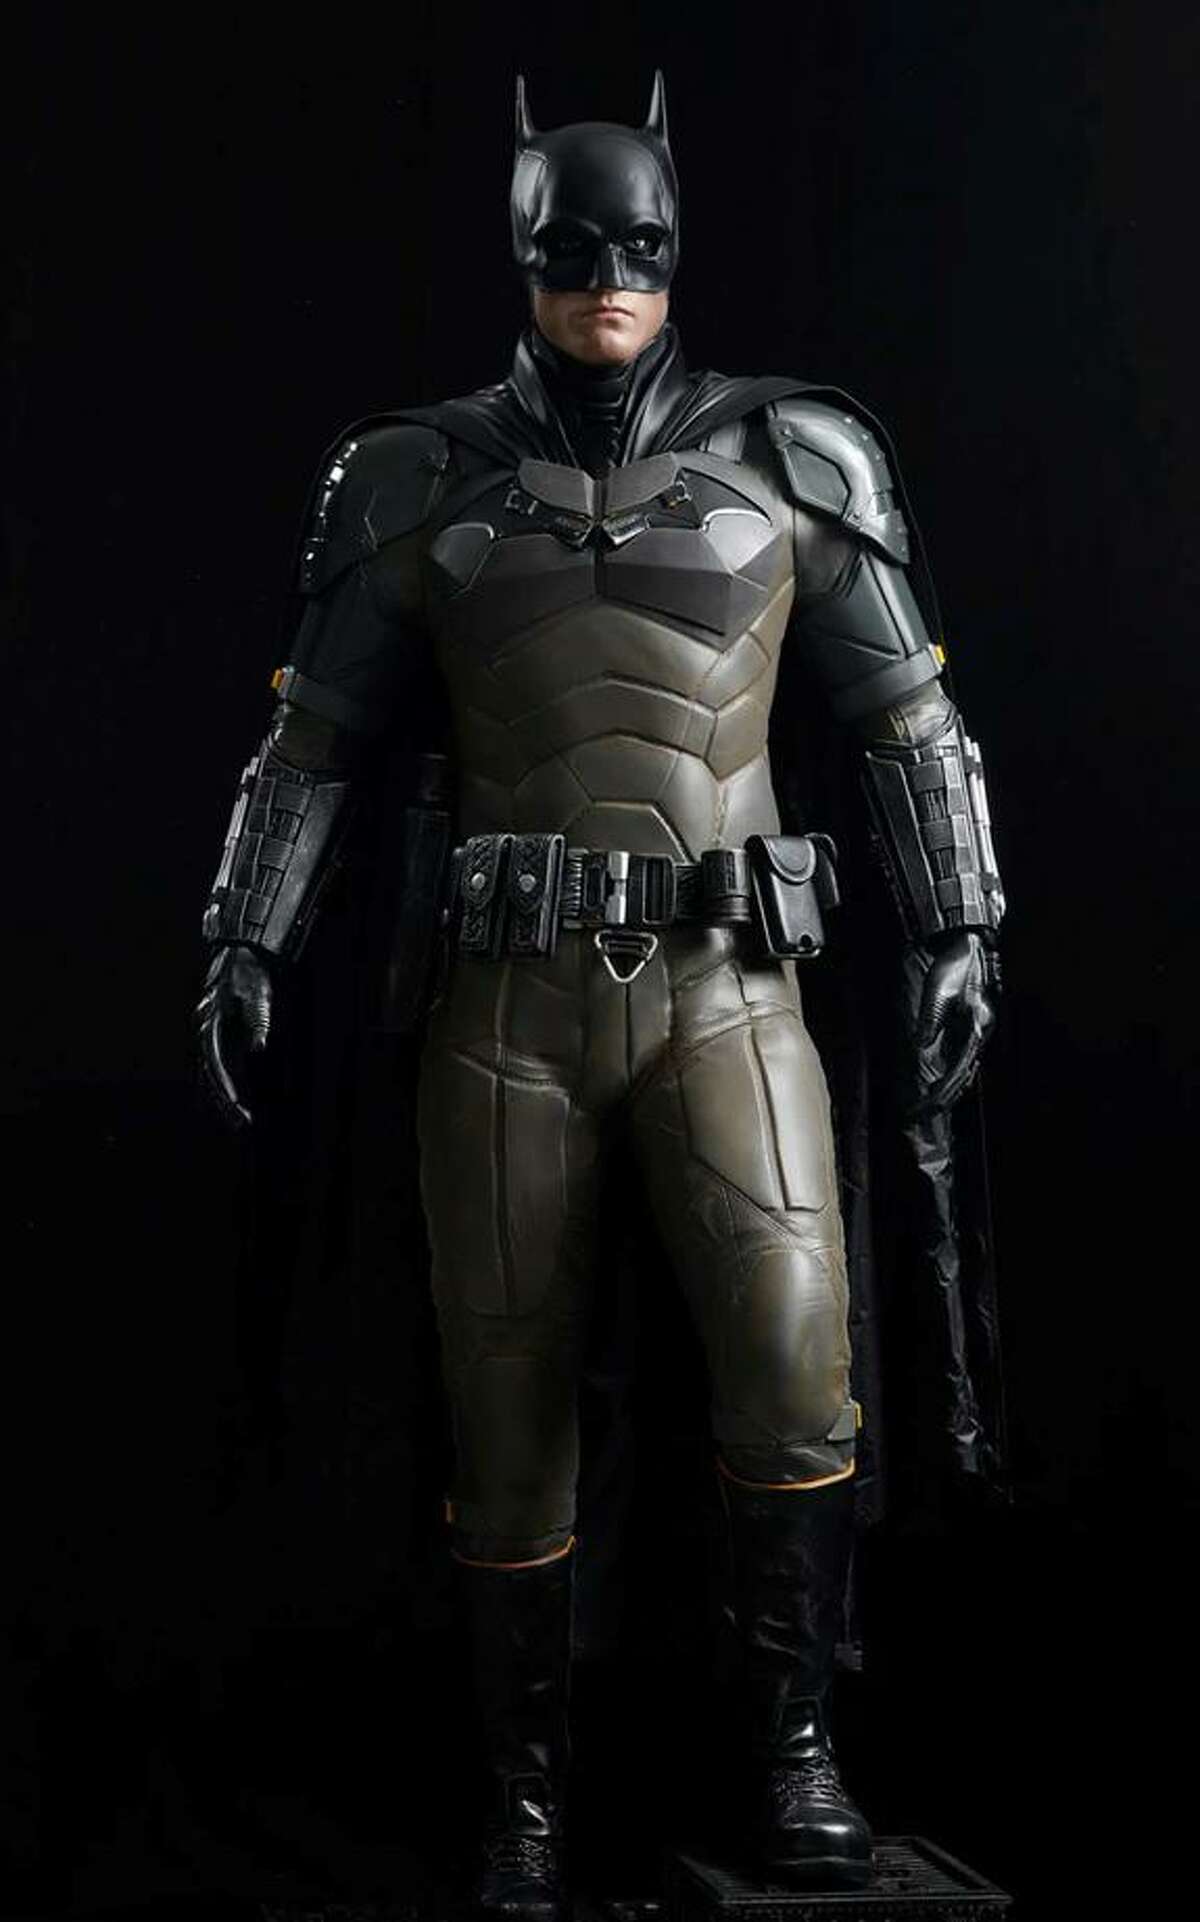 A Batman statue from Tony Parker's collection, which will be on display at the San Antonio Museum of Art.